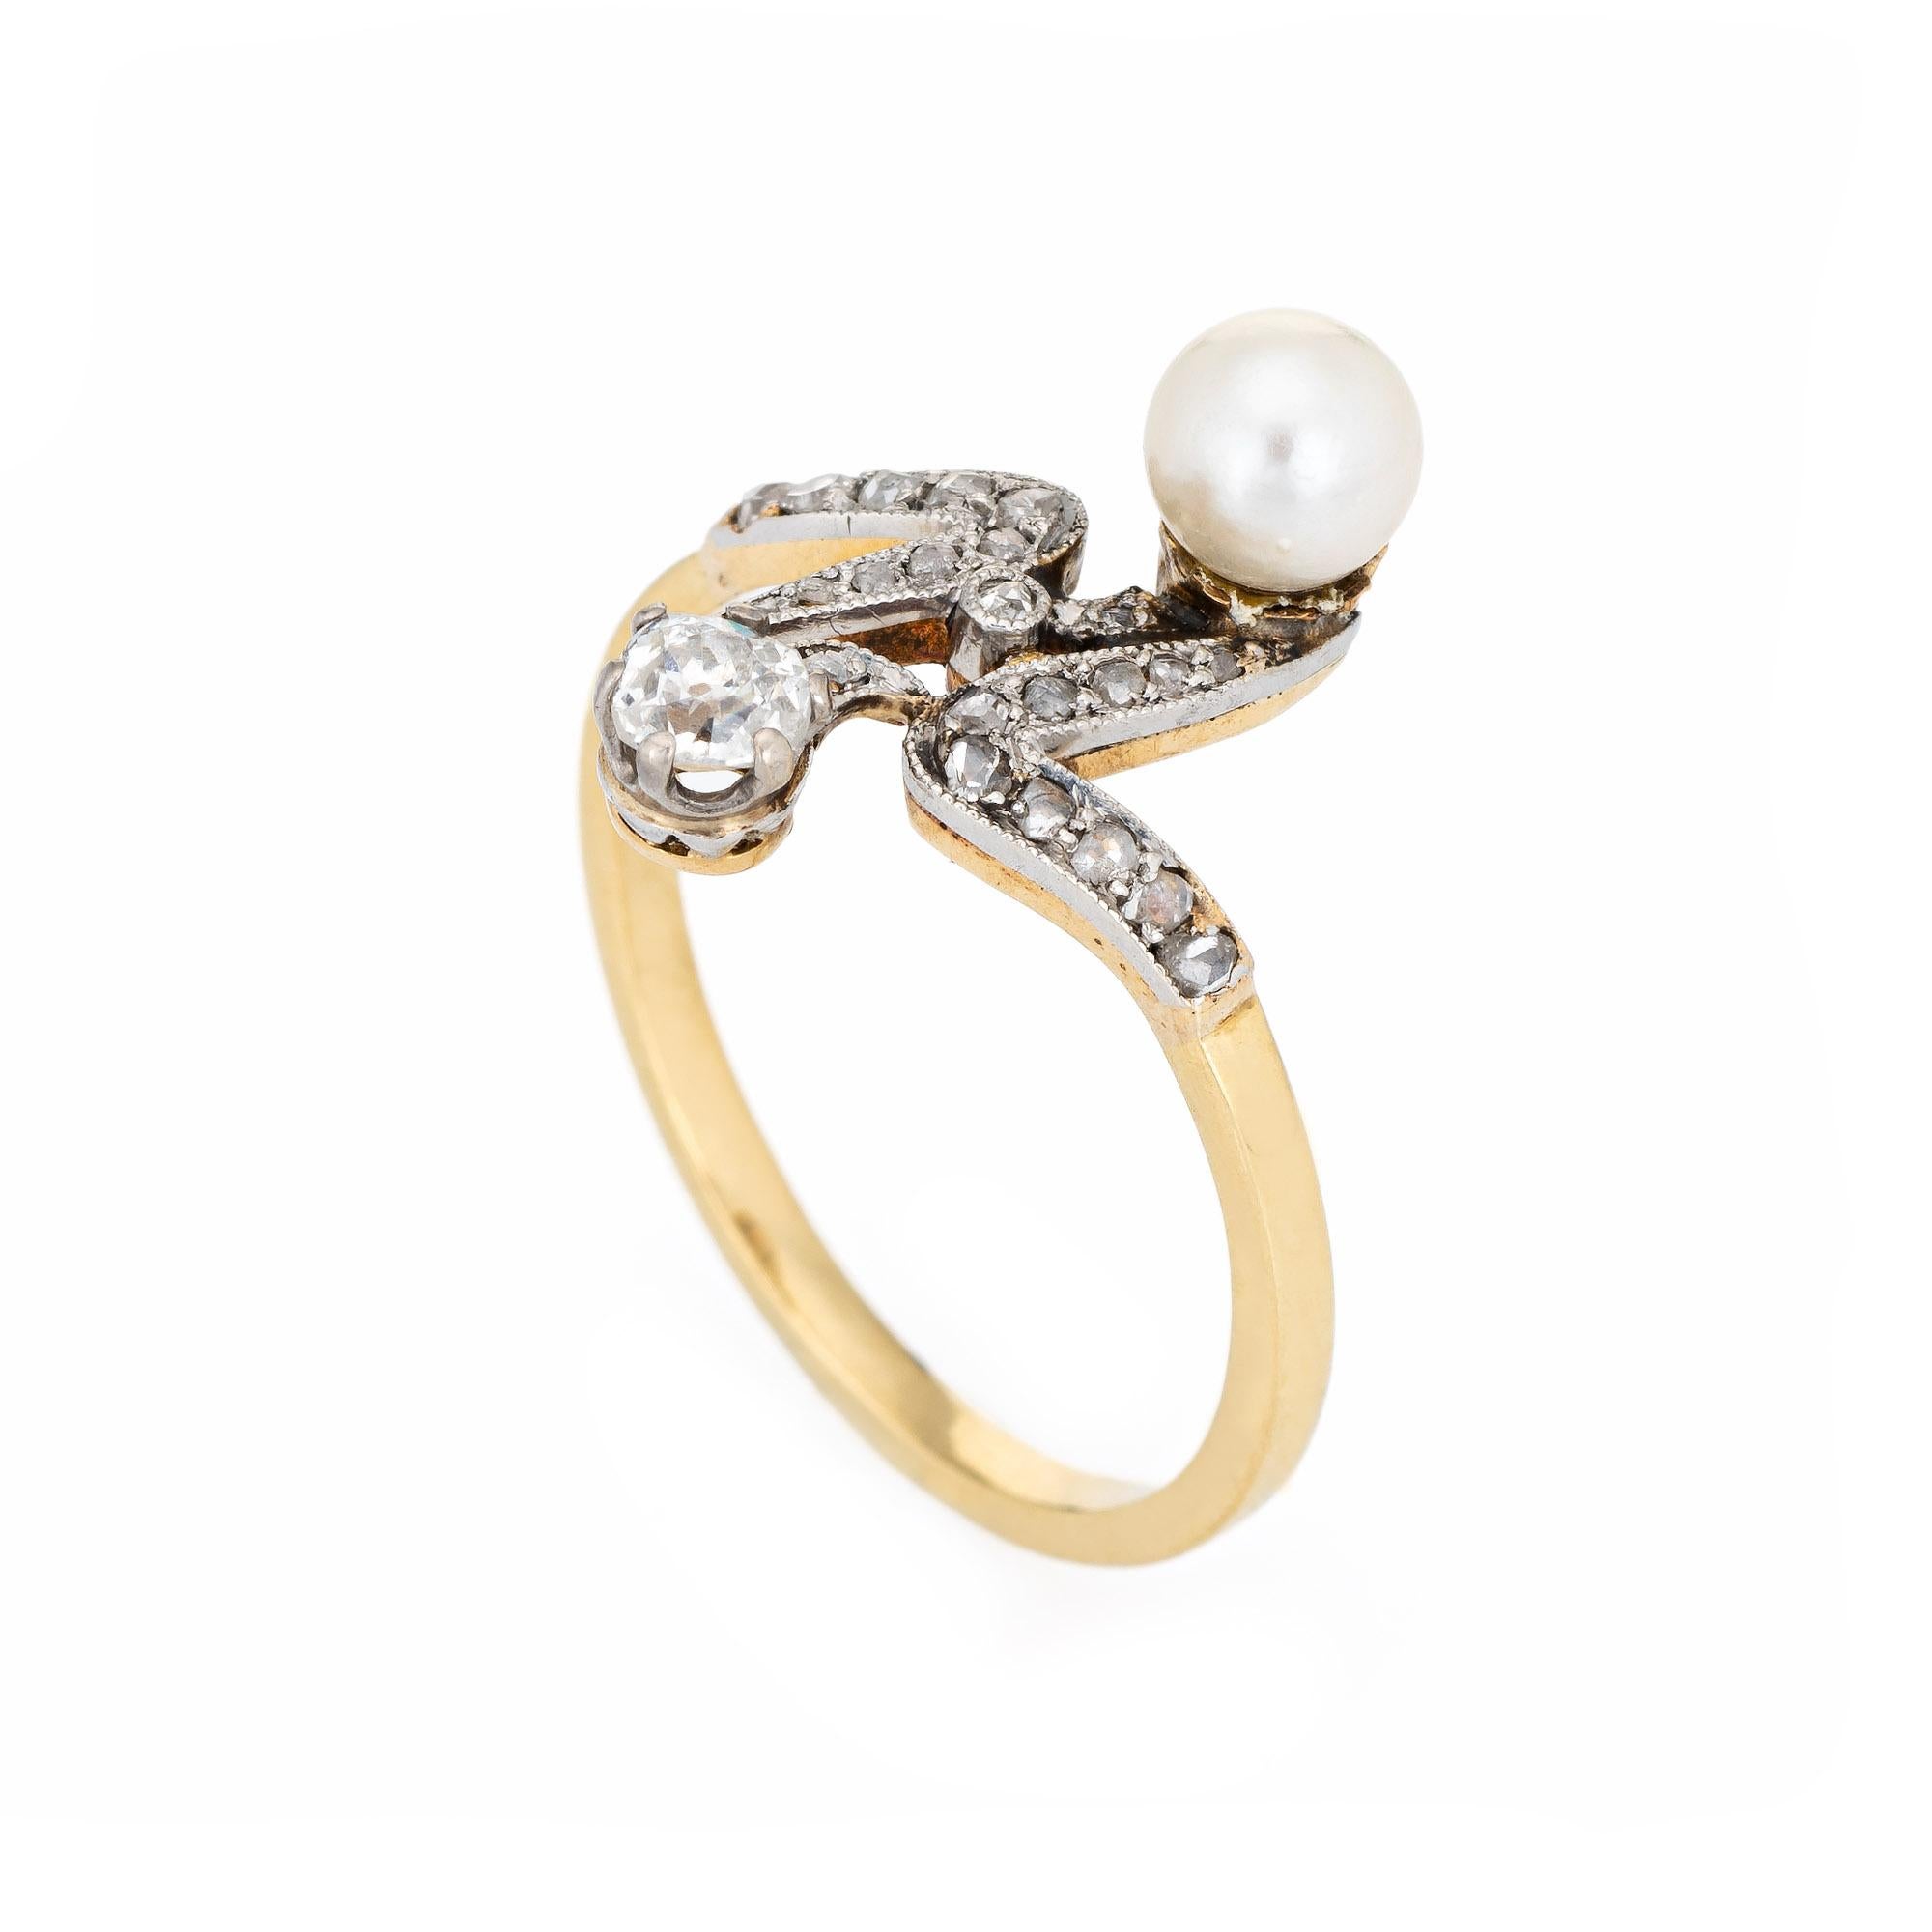 Finely detailed antique Edwardian diamond & pearl 'moi et toi' ring crafted in 18k yellow gold (circa 1910s).  

The old cushion cut diamond is estimated at 0.25 carats, accented with a further 23 estimated 0.01 carat rose cut diamonds. The total